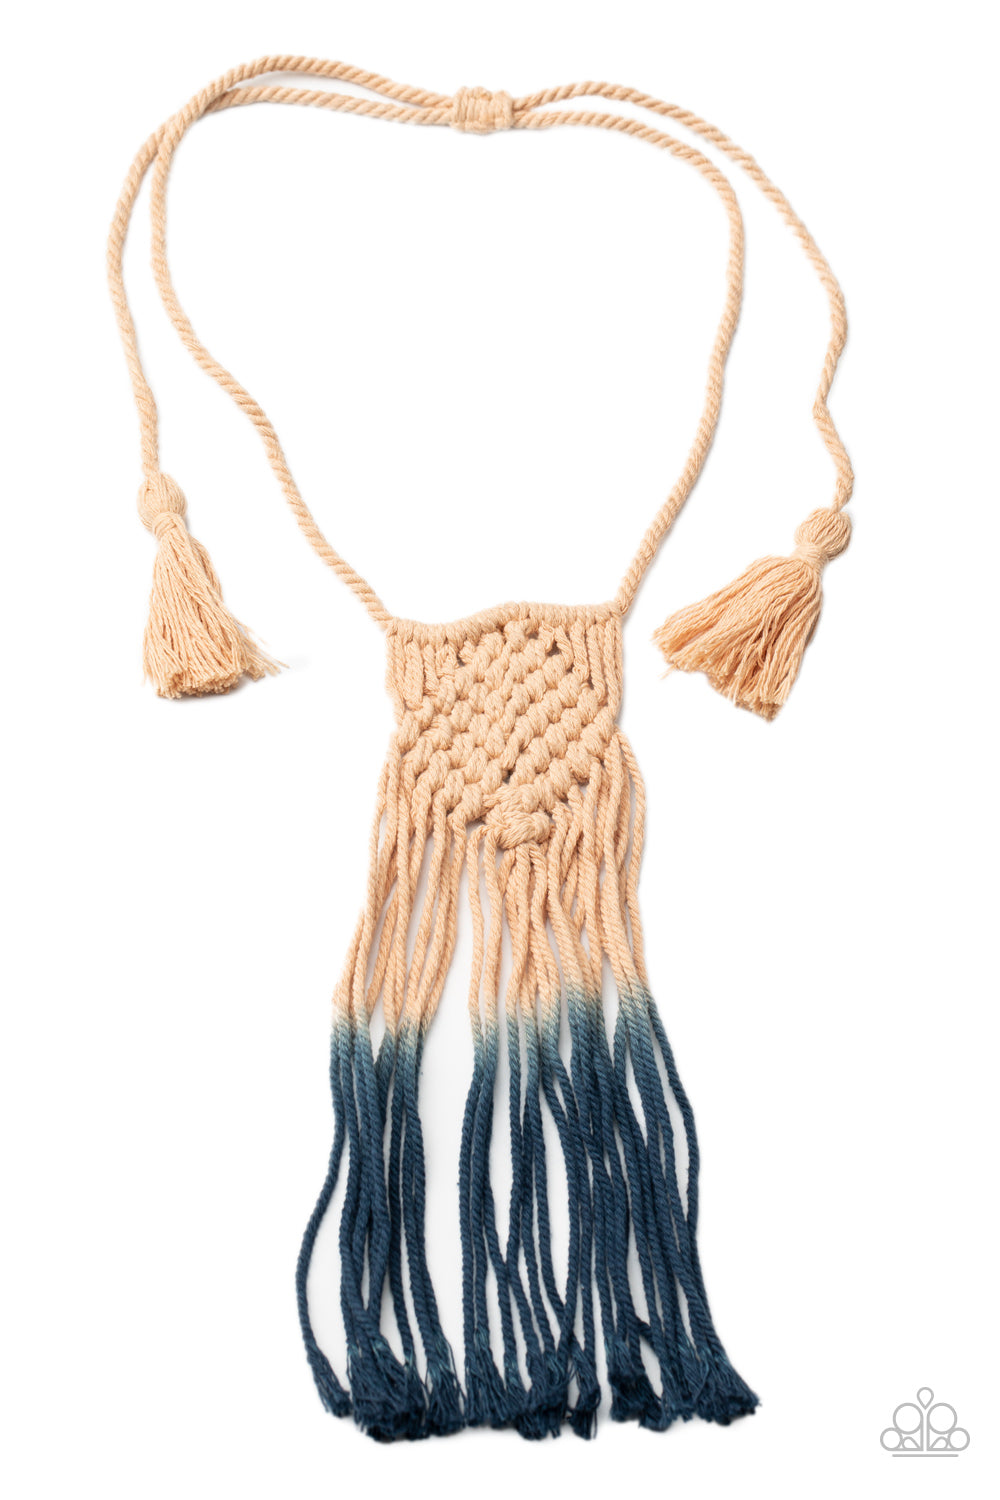 Paparazzi - Look At MACRAME Now - Blue Necklace